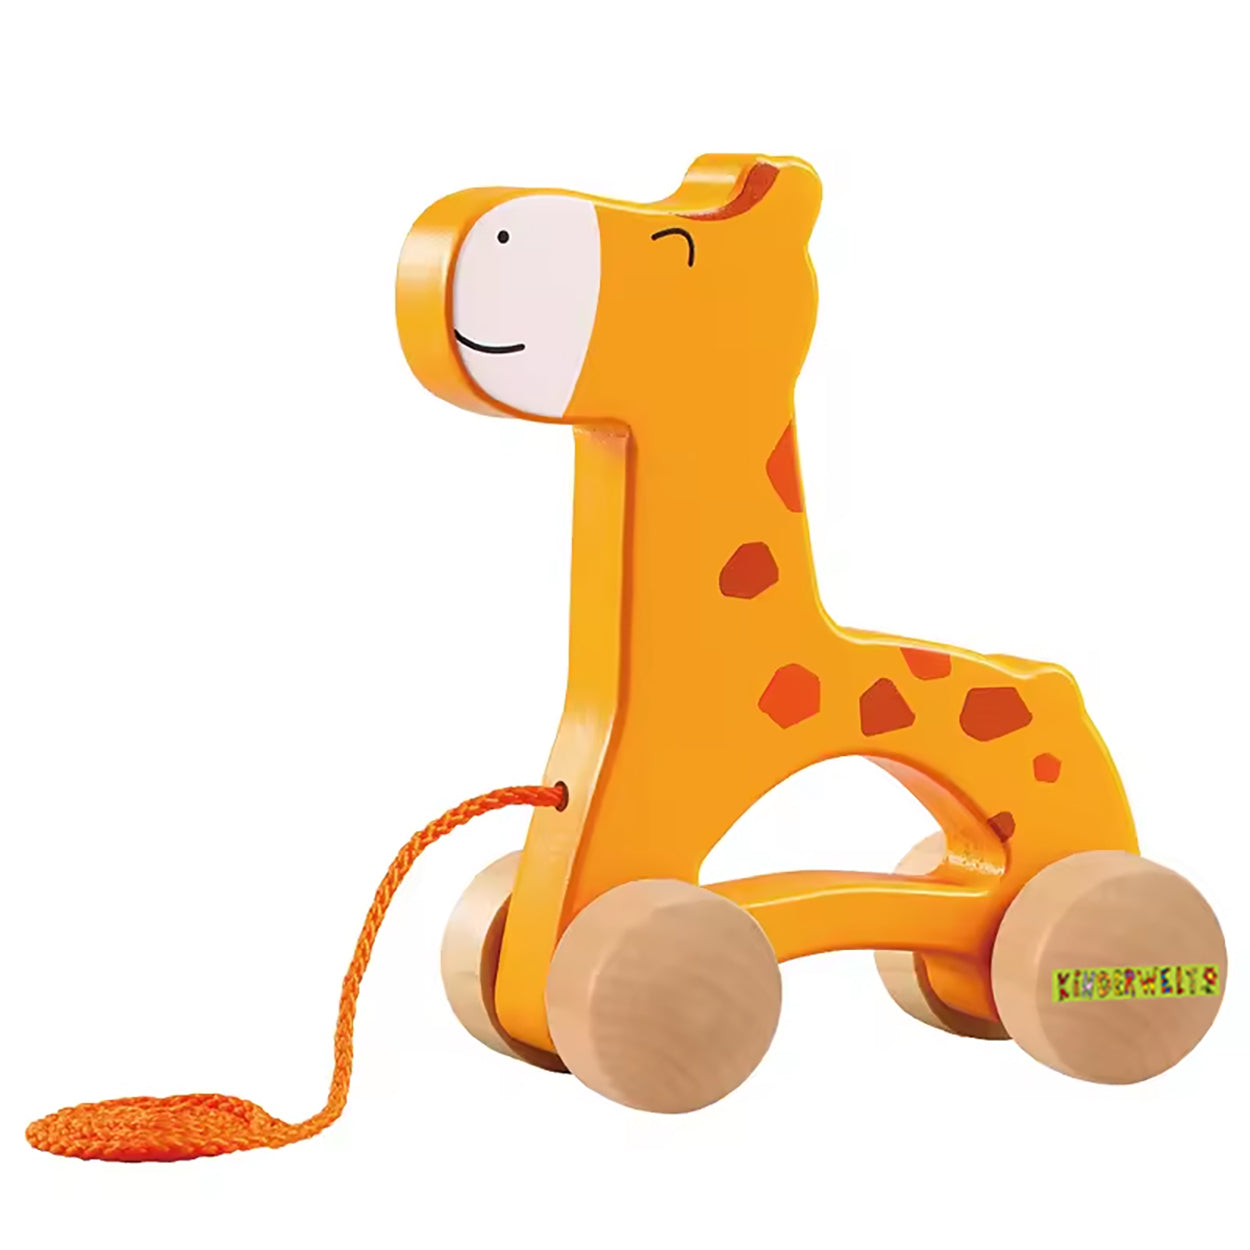 Pull-along toy giraffe made of wood, child-friendly educational toy, children's toy for pulling, pushing and playing